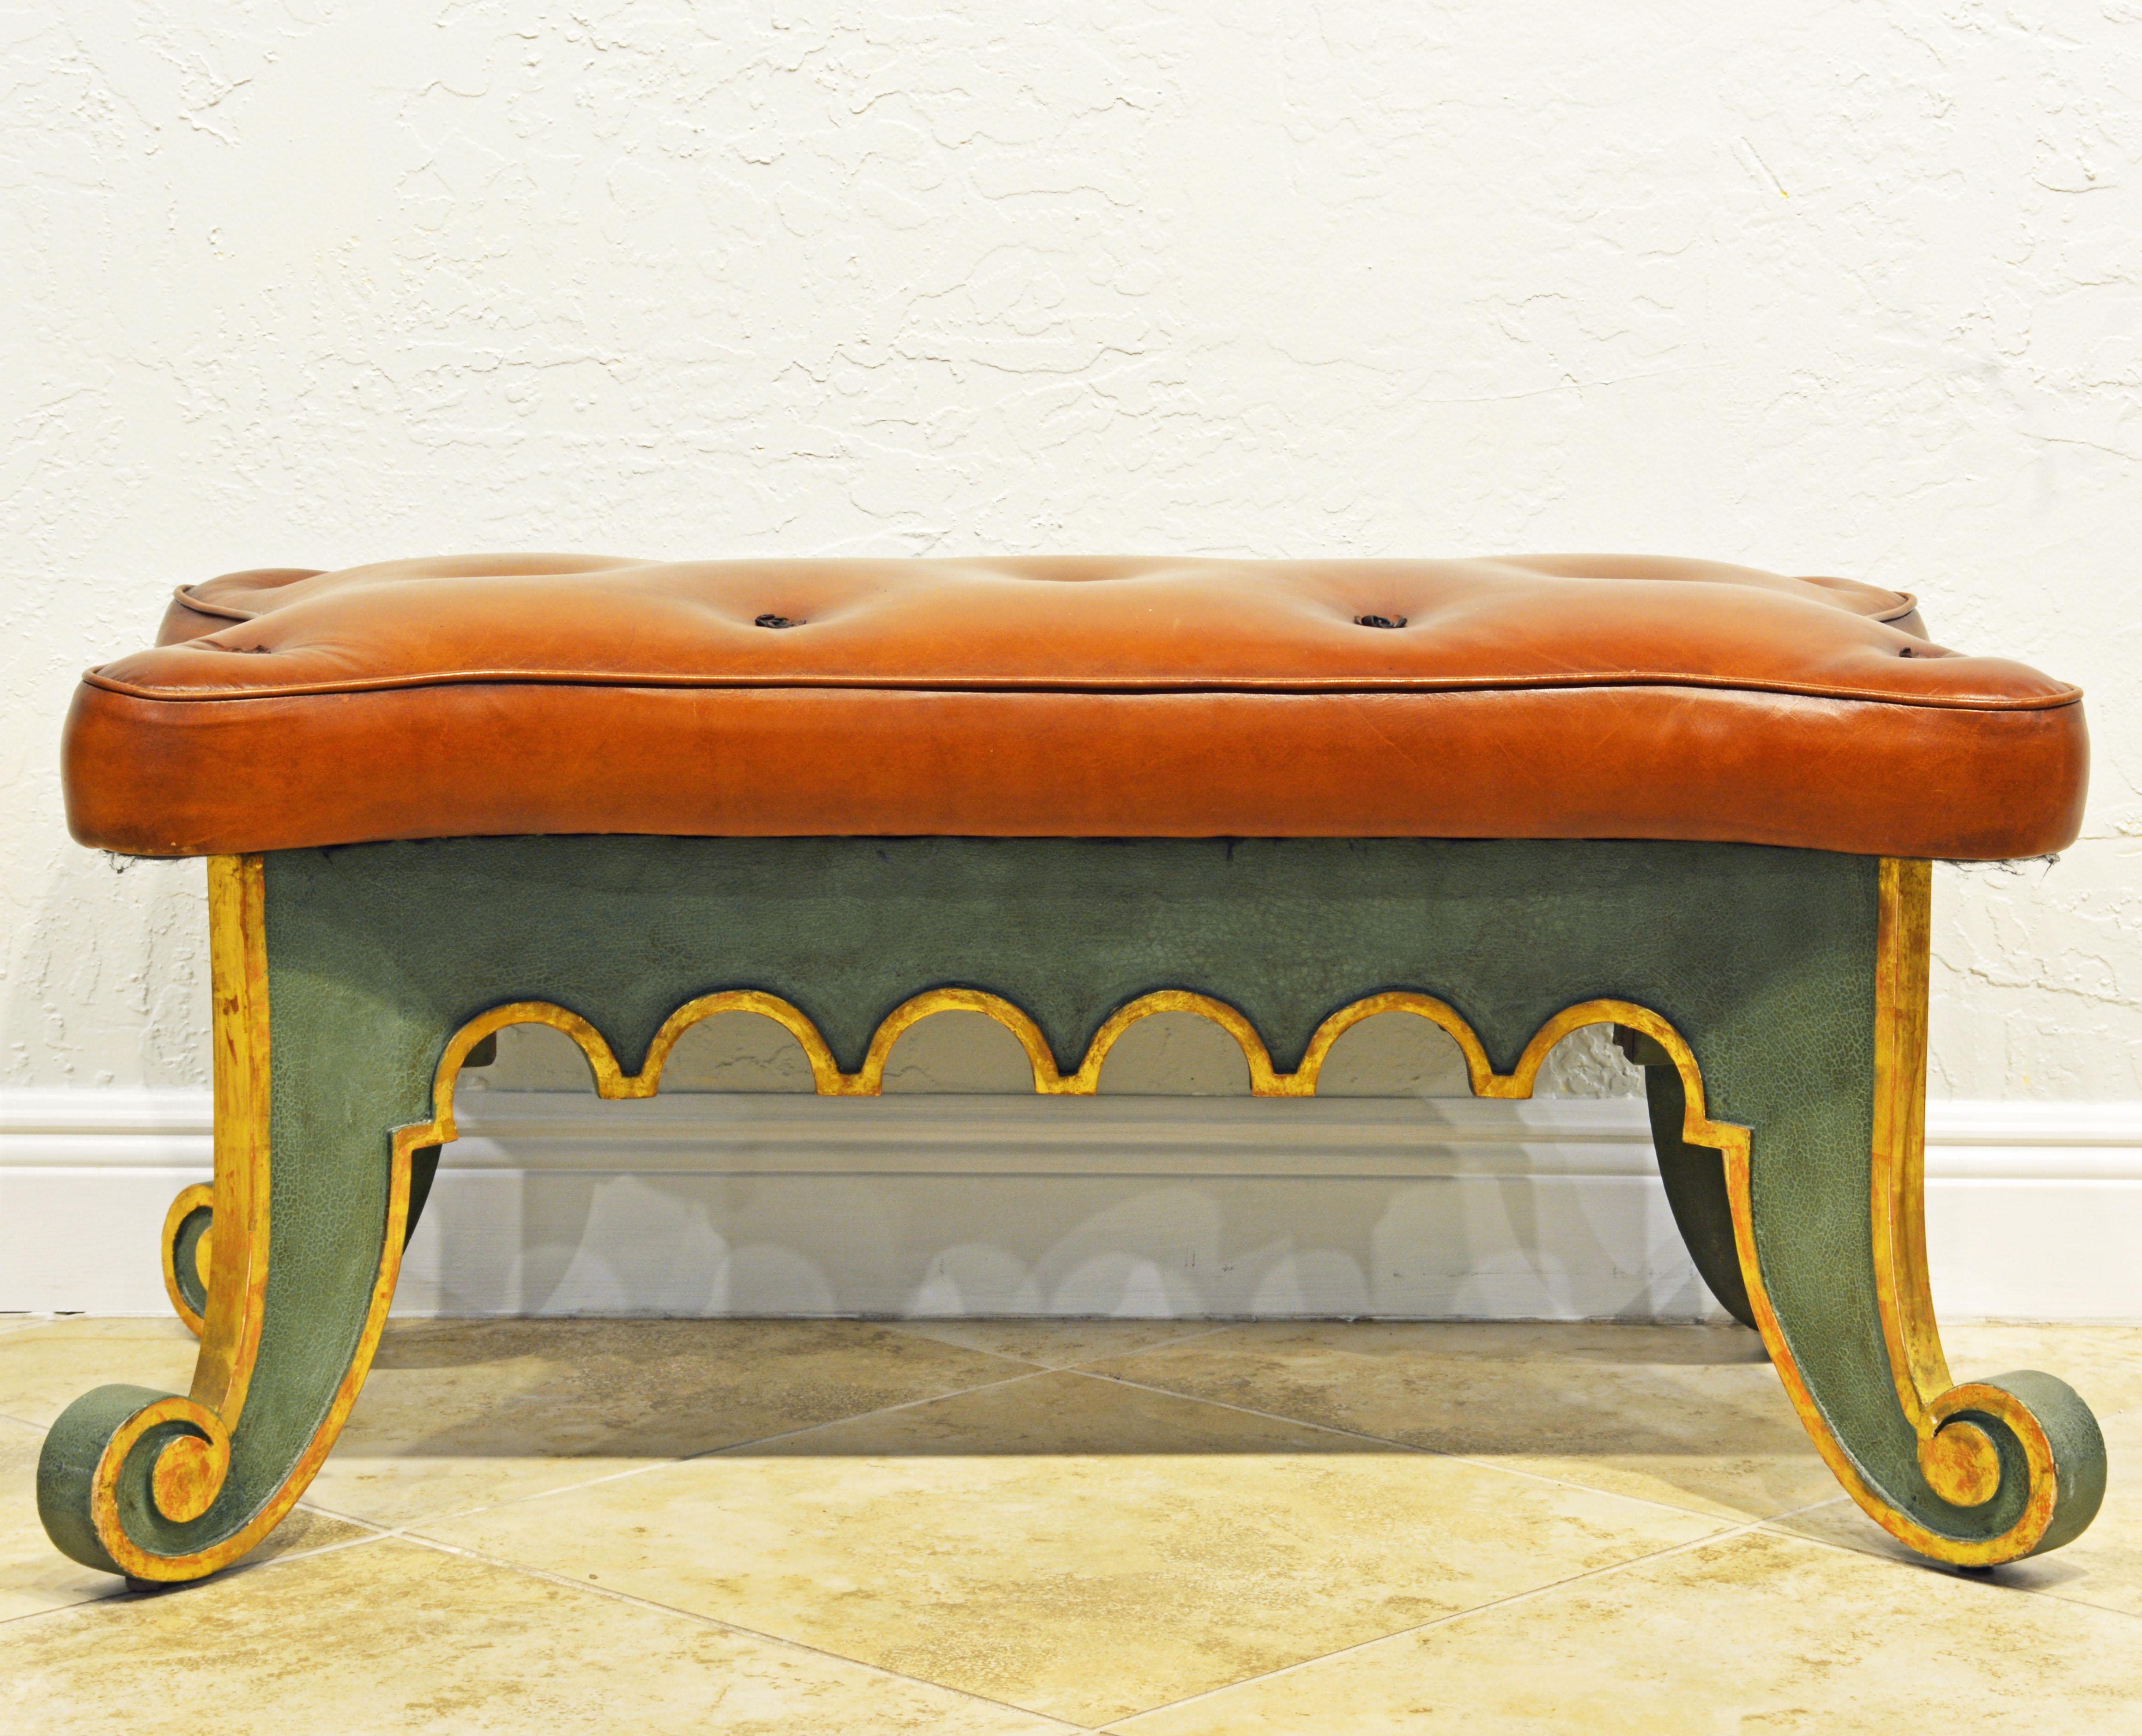 This Italian Venetian style bench features a beautiful tan tufted leather cover on comfortable upholstery set on a antique green painted frame with gilt trimmings on the carved arches and the elegantly scrolled legs and feet.